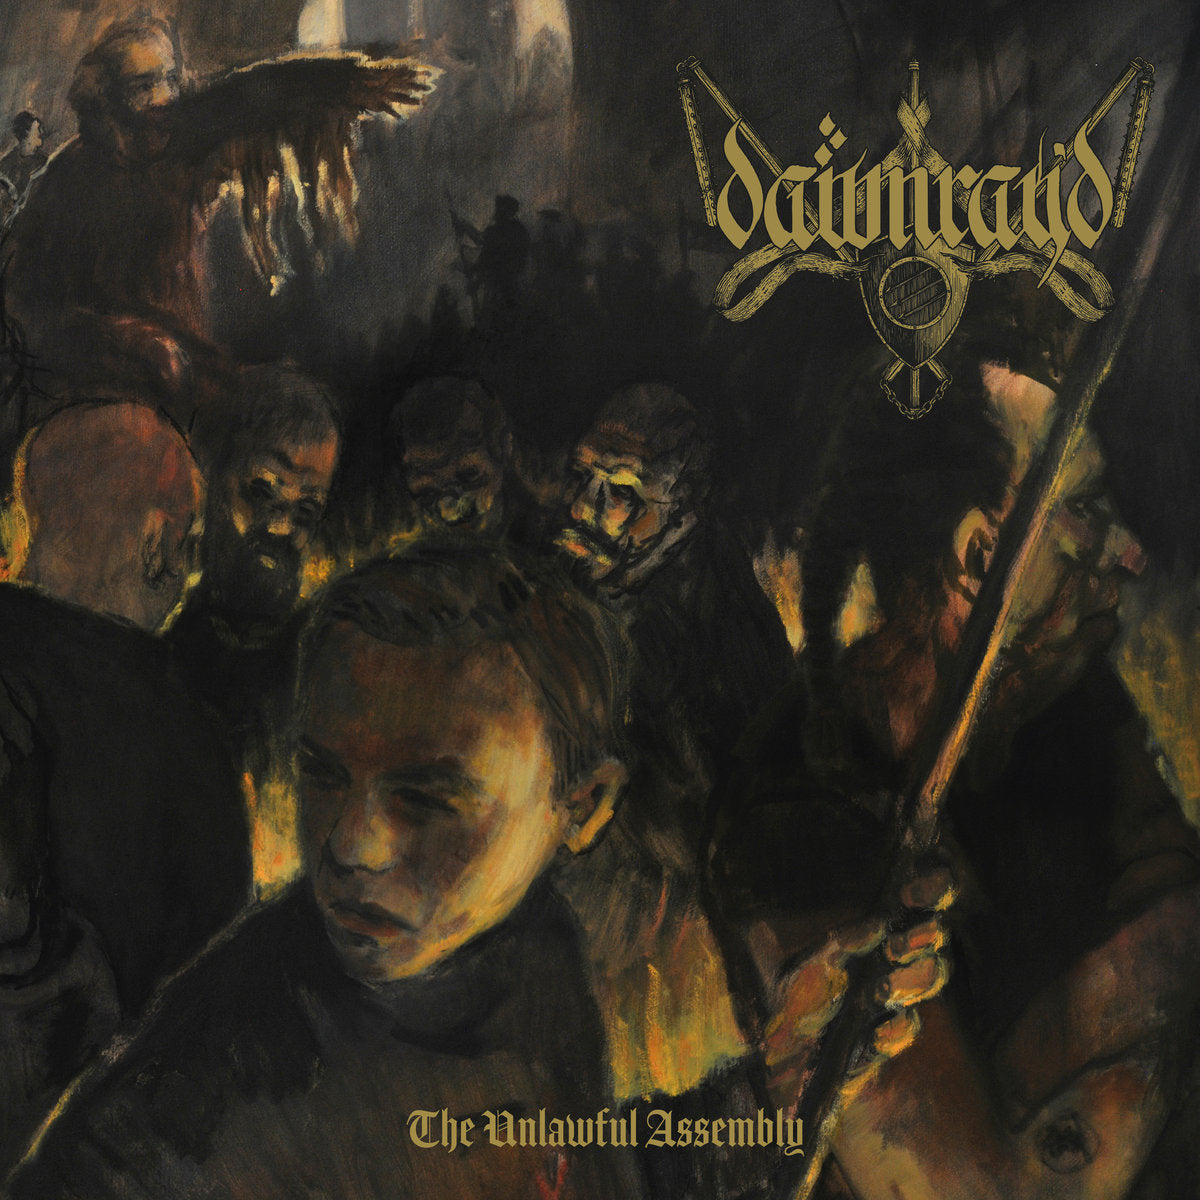 DAWN RAY'D "The Unlawful Assembly" LP